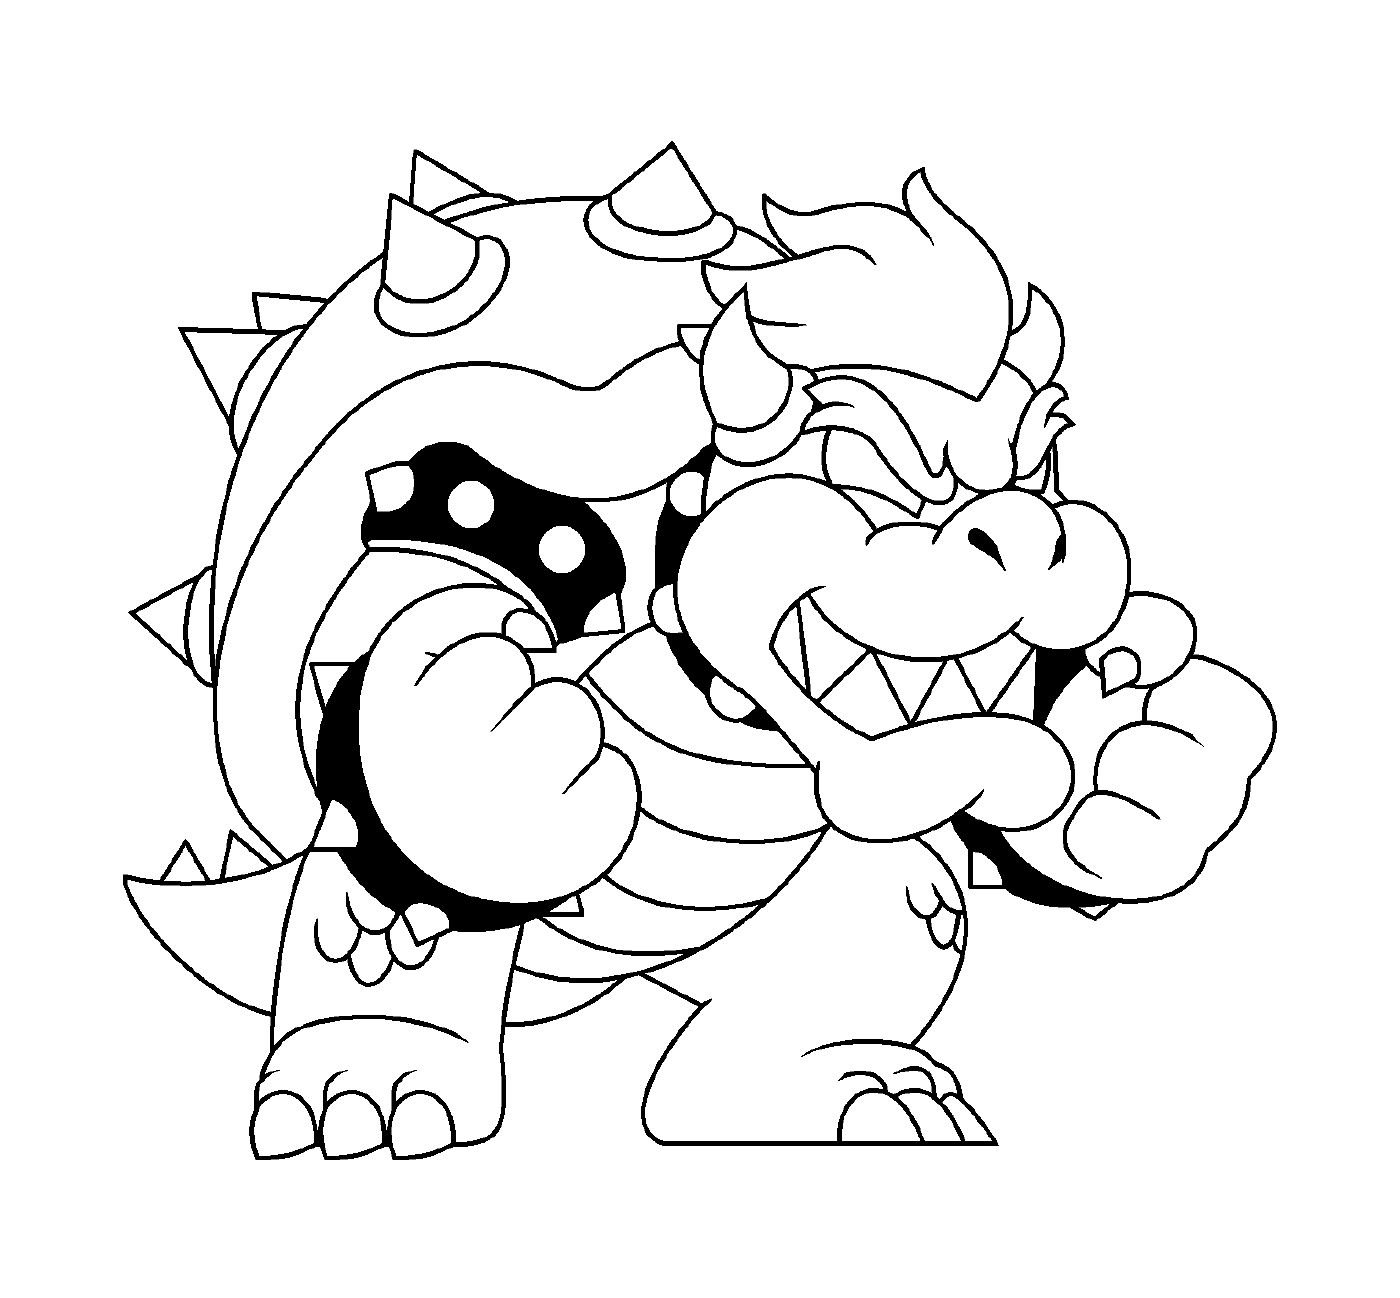  Bowser's getting his strength back 